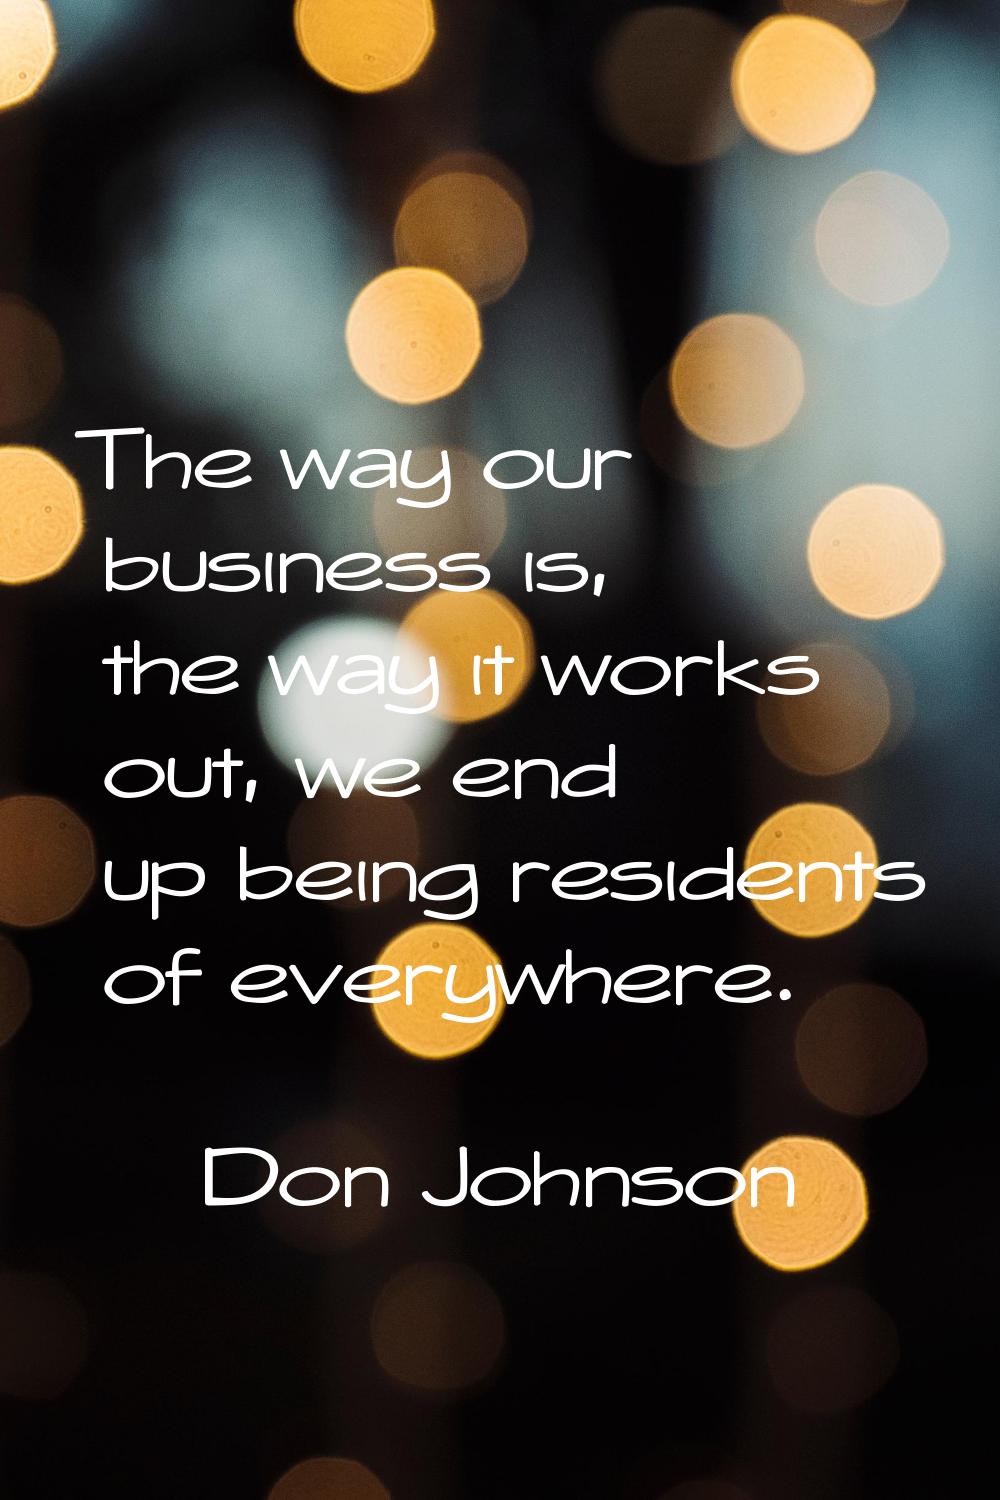 The way our business is, the way it works out, we end up being residents of everywhere.